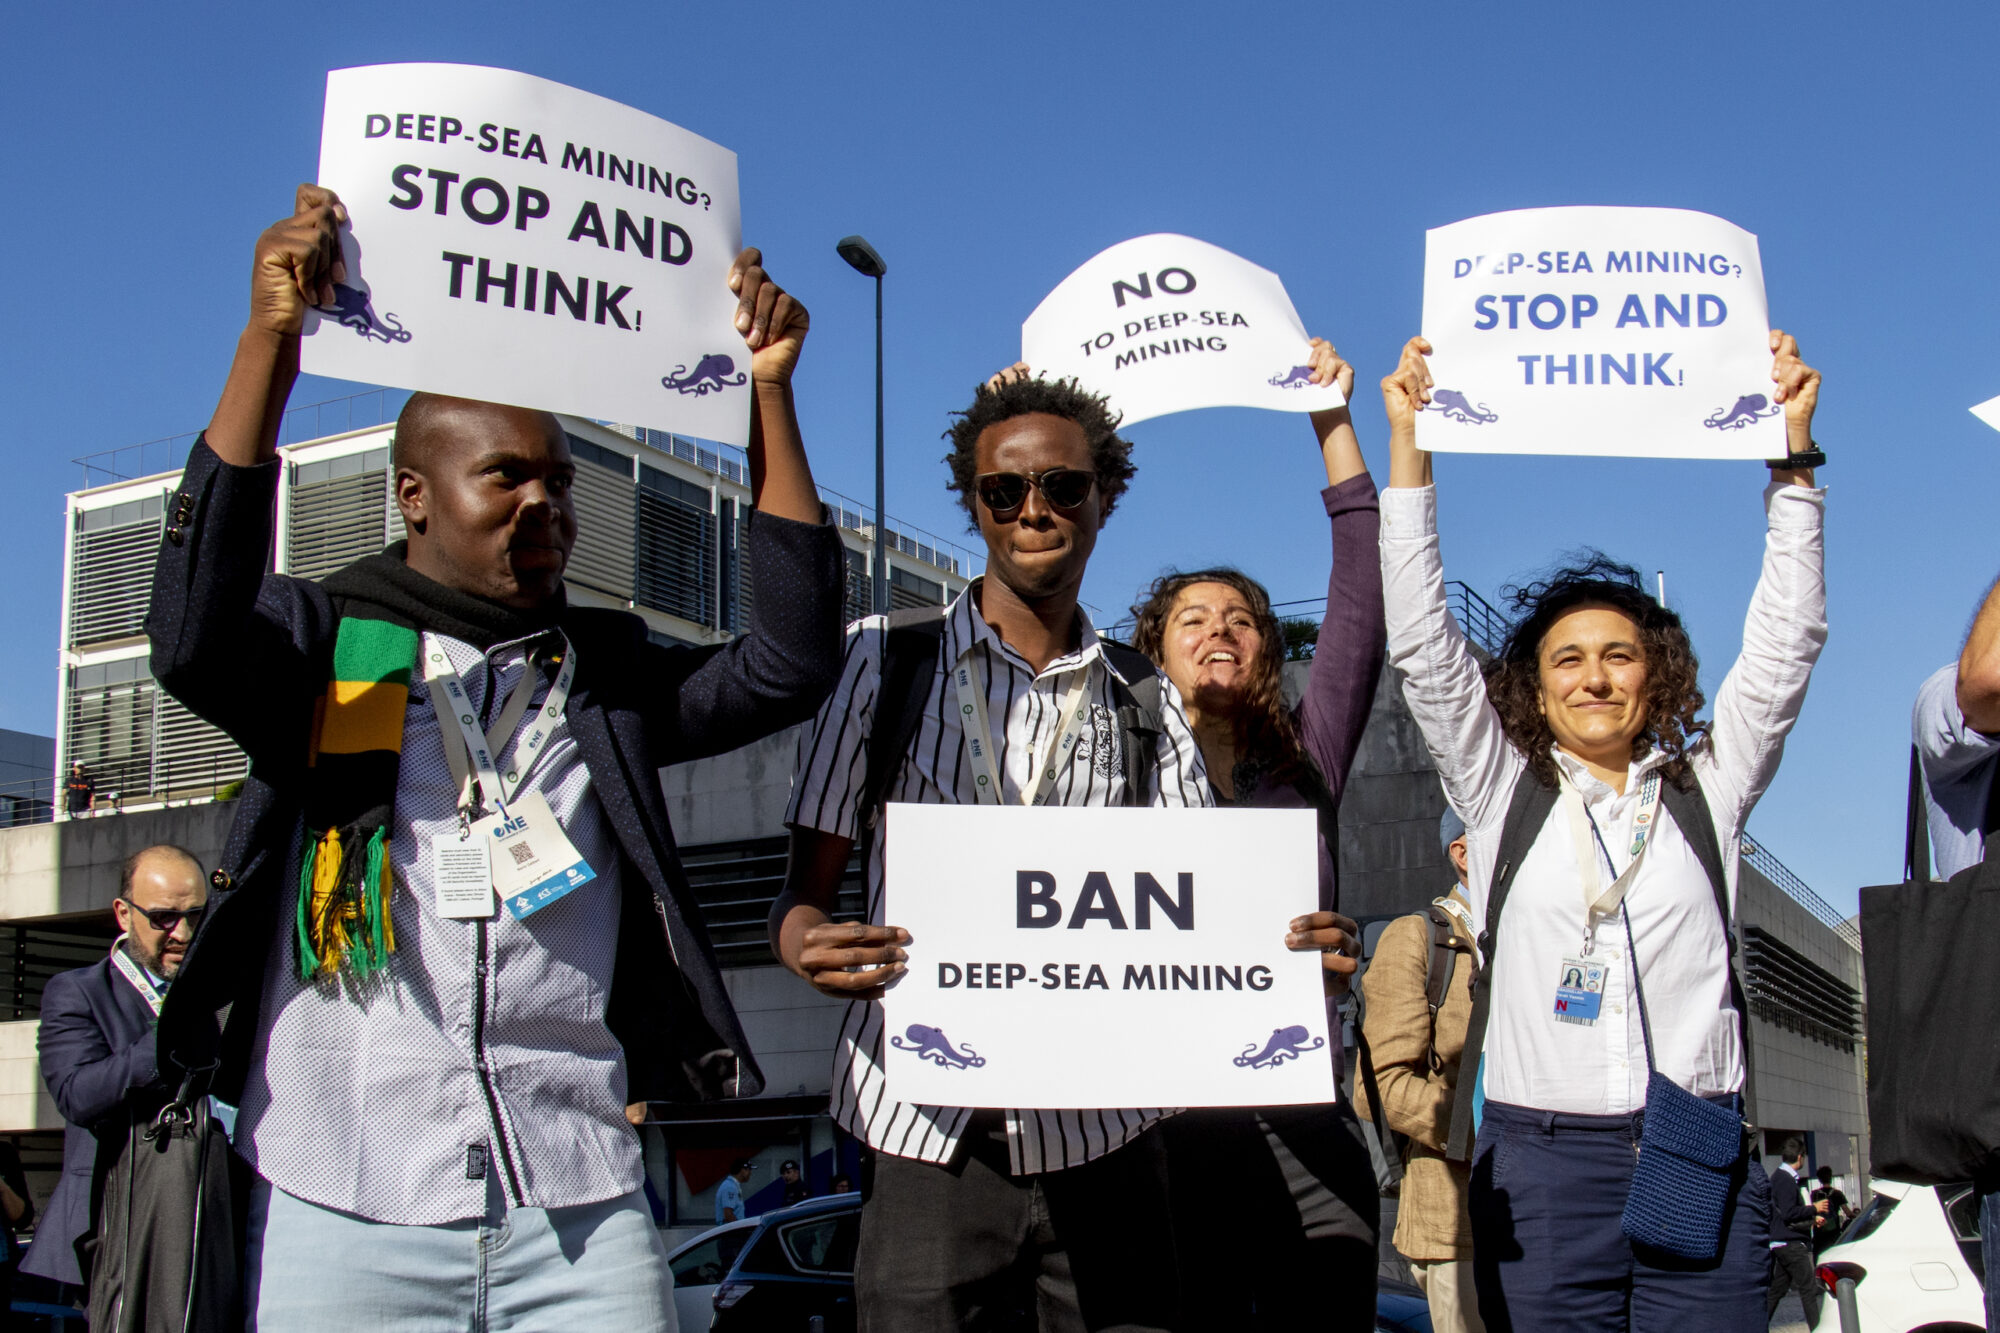 Activists call for a ban on deep-sea mining